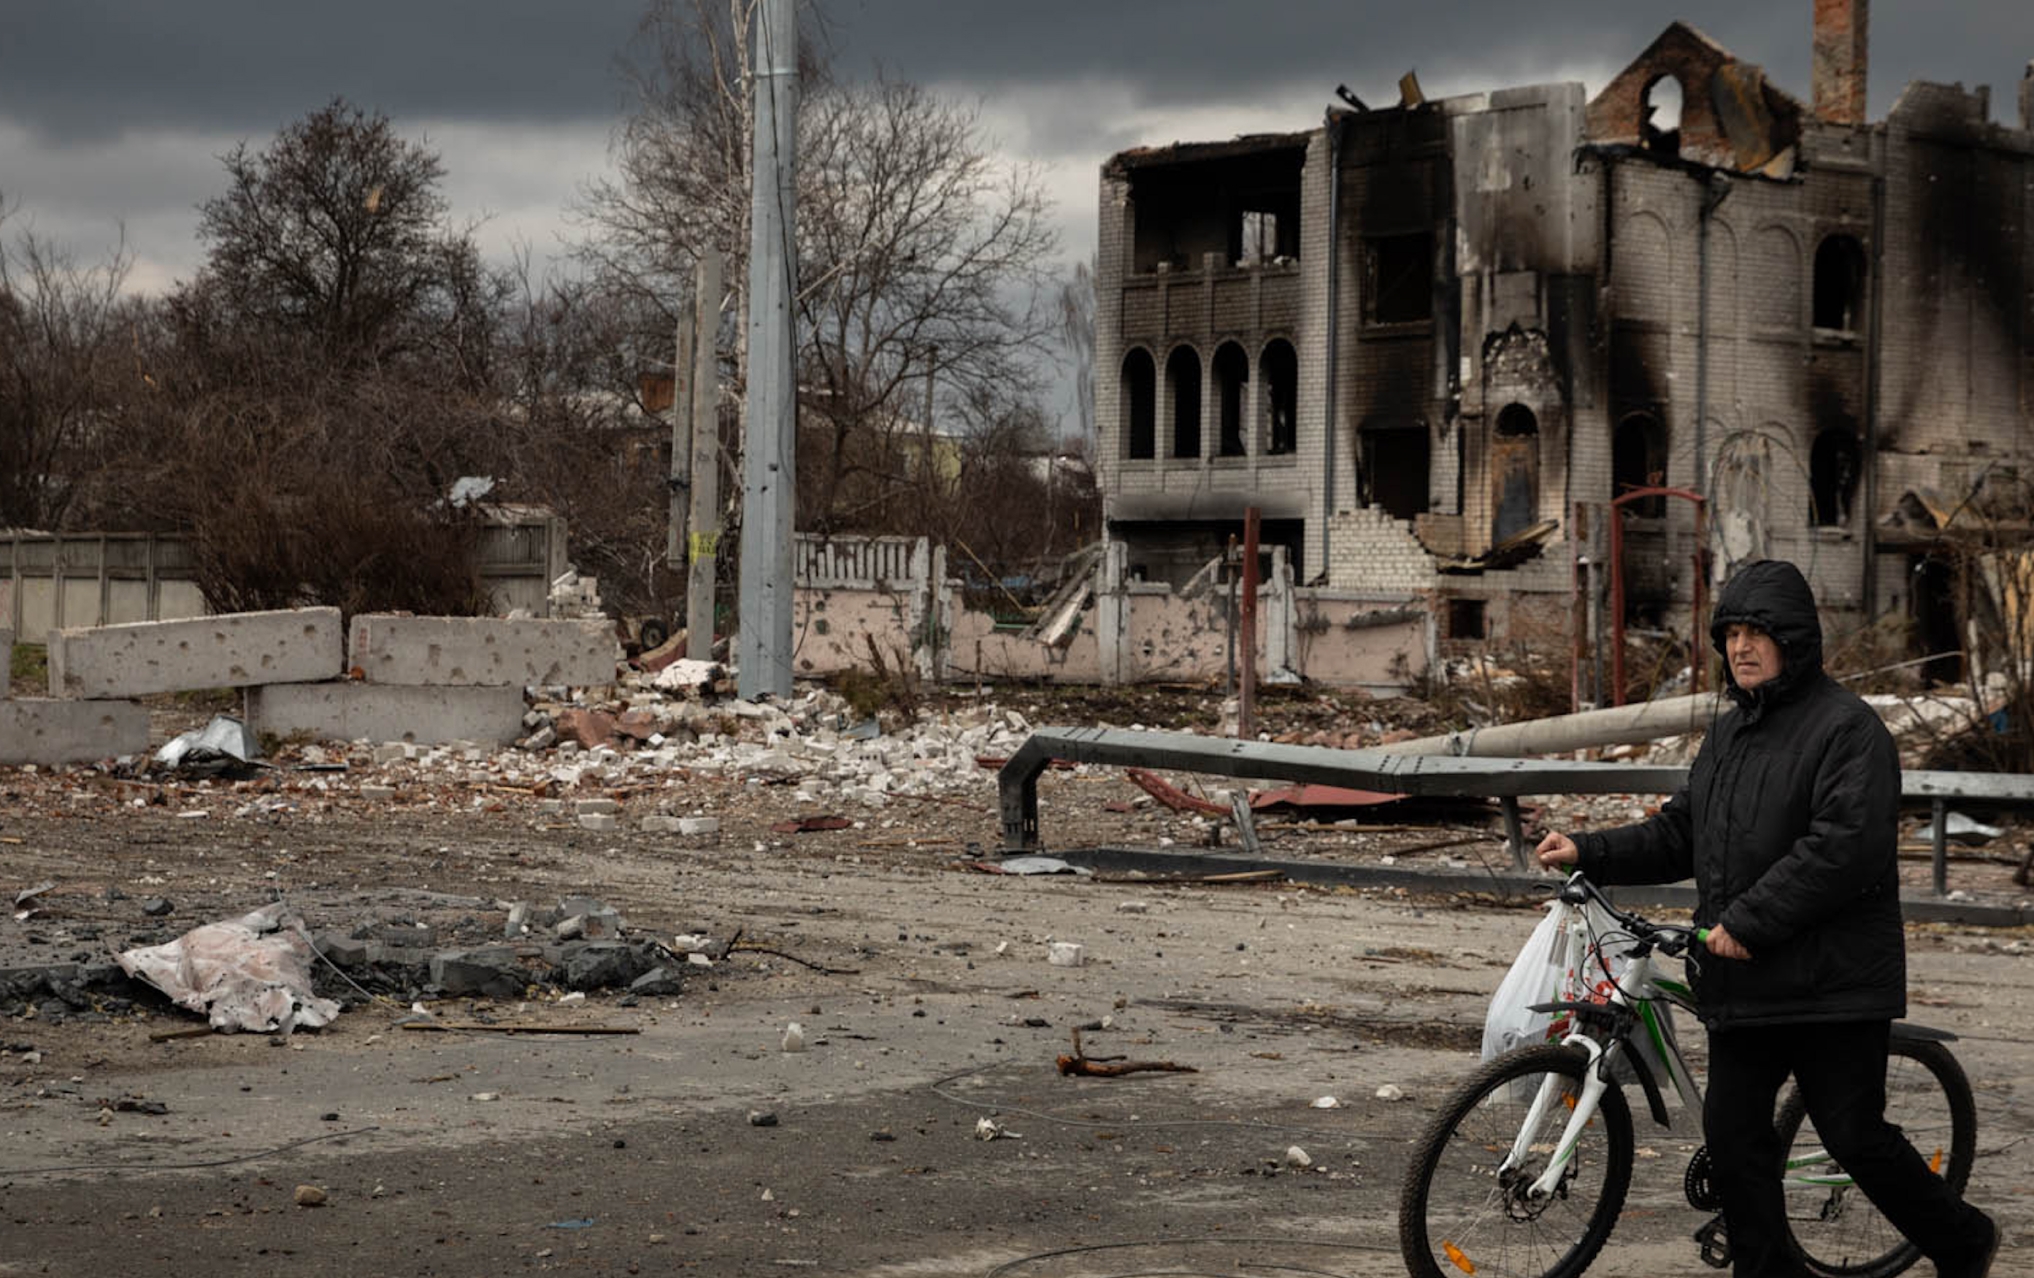 Man walks with a bike in front of a bombed building in Ukraine